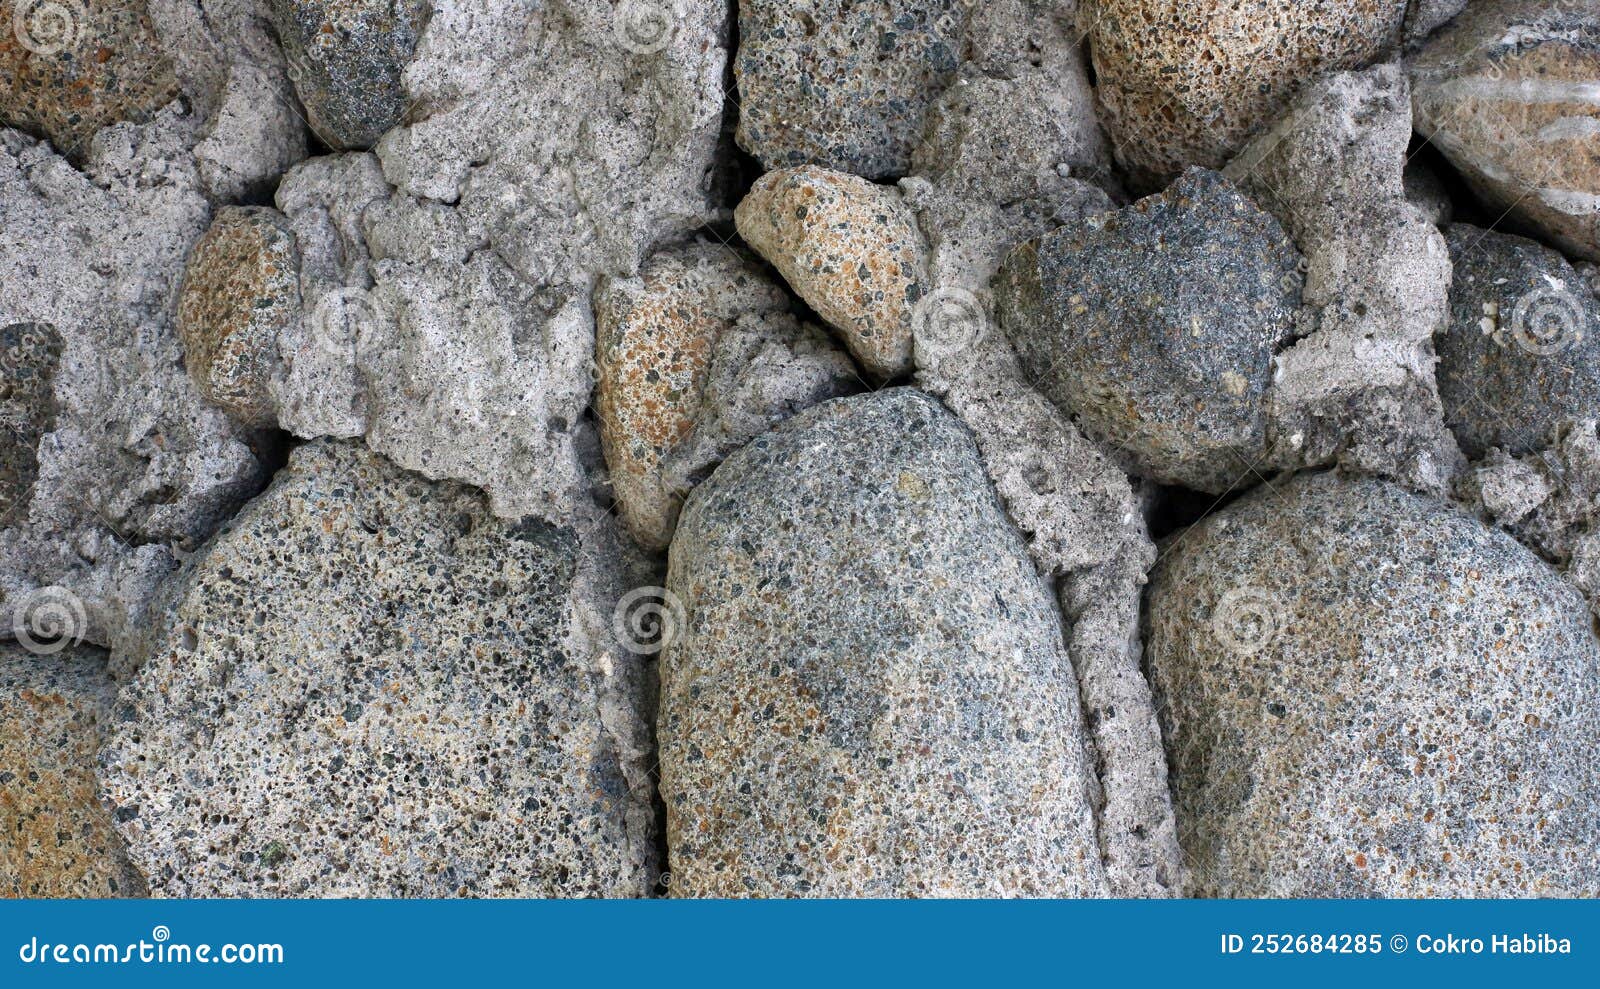 cemented mountain rocks and used as house fences